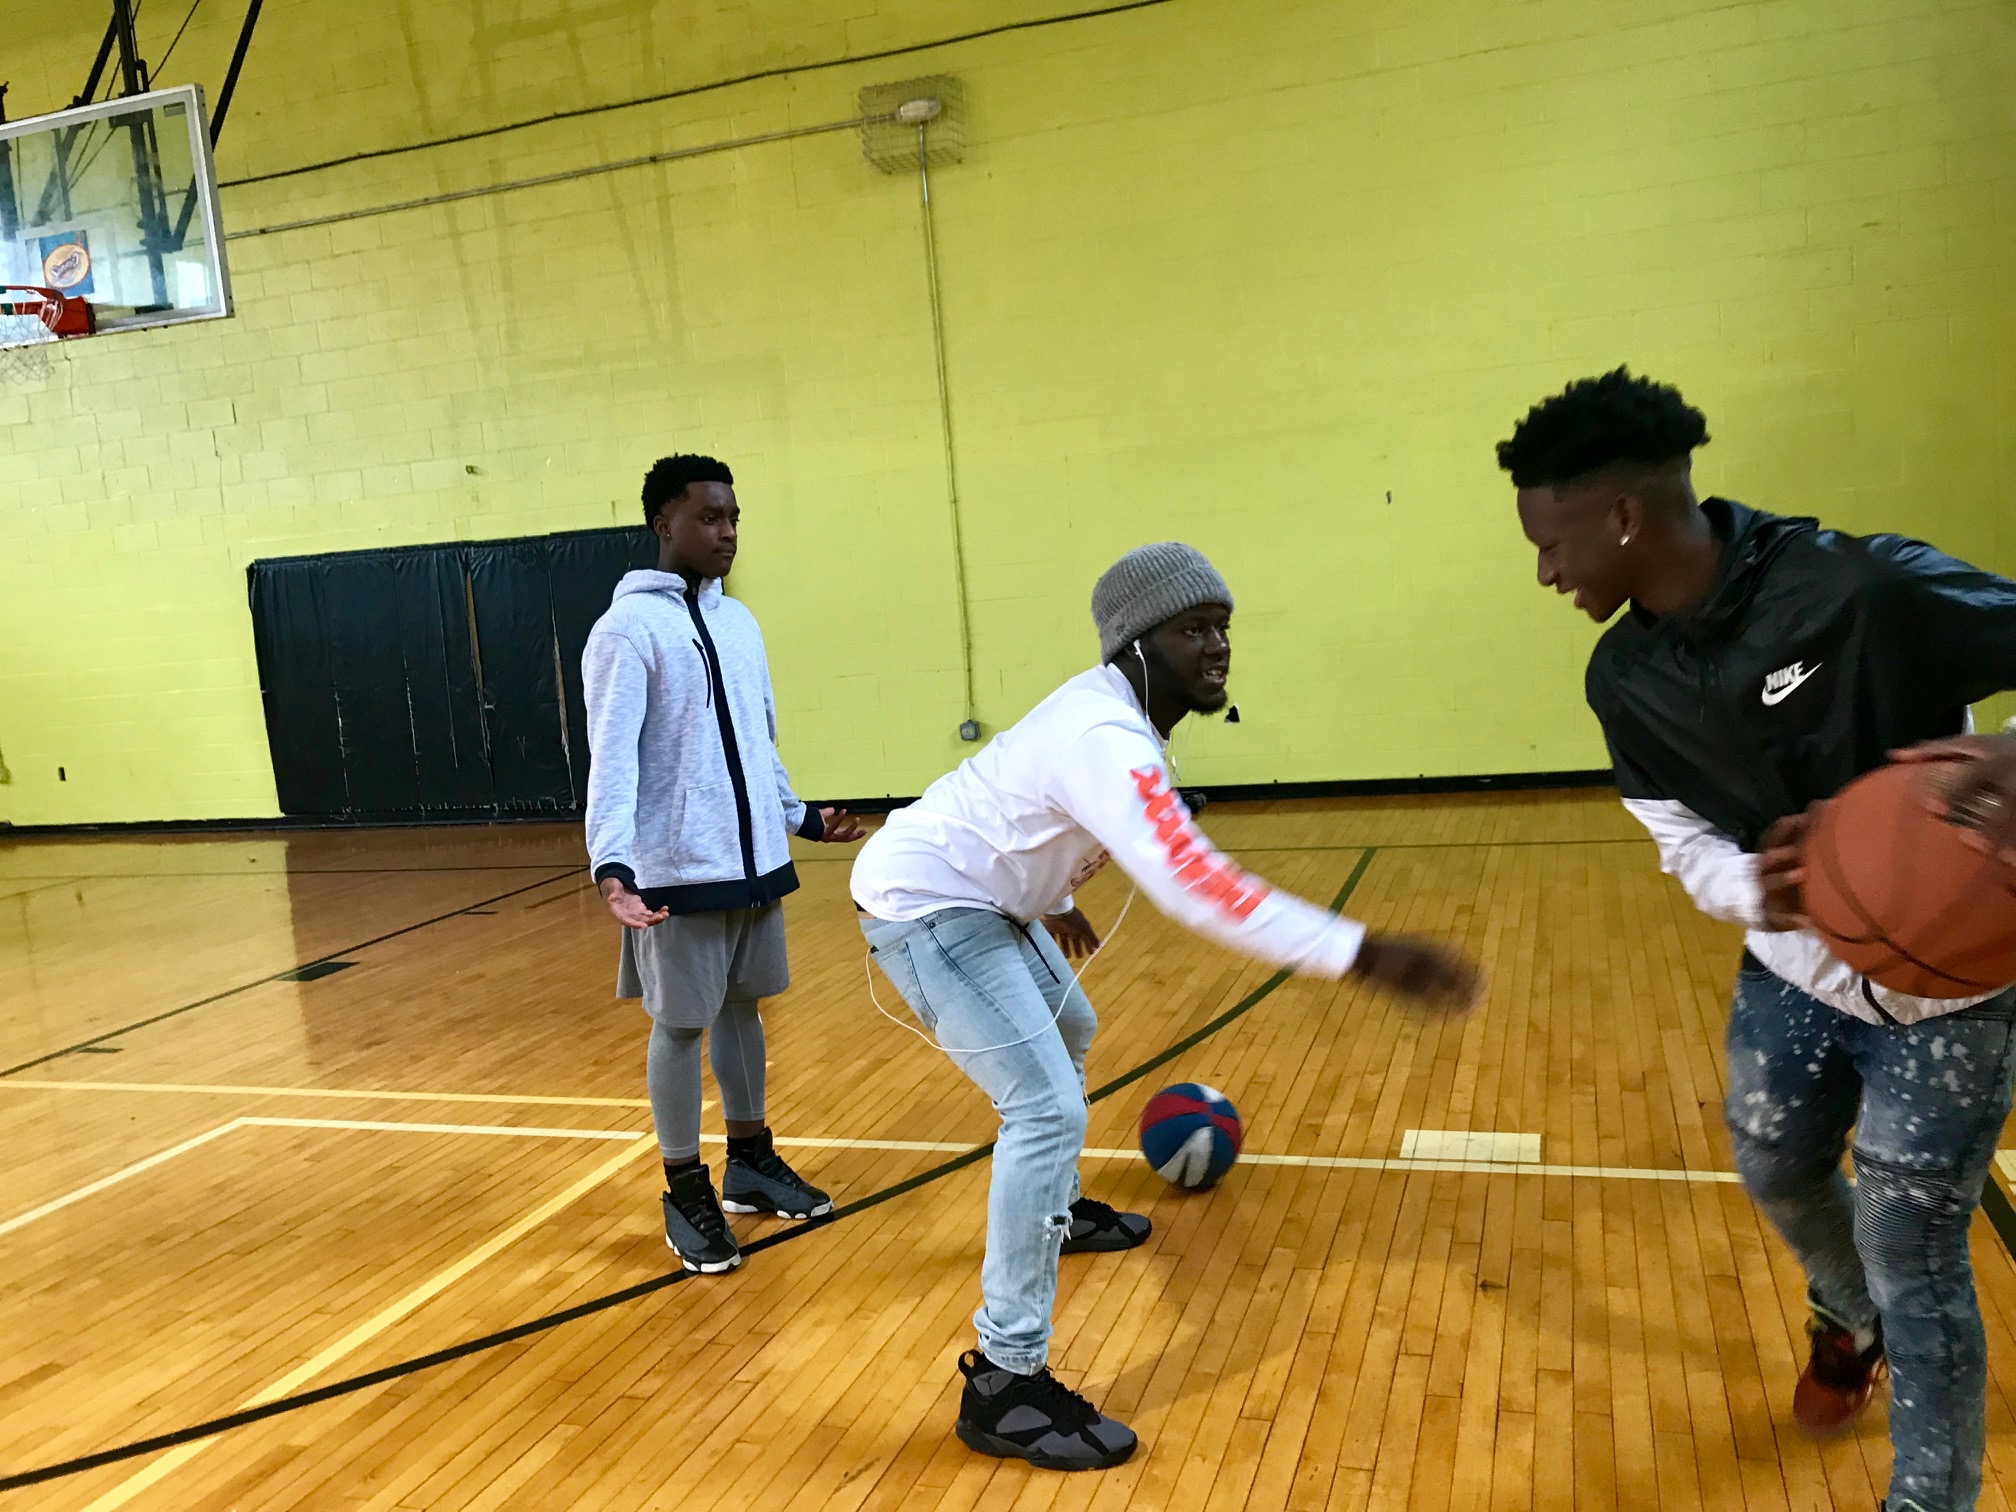 Teens and staffers play basketball during downtime between programs like financial literacy classes and service projects. (Cole Bradley)